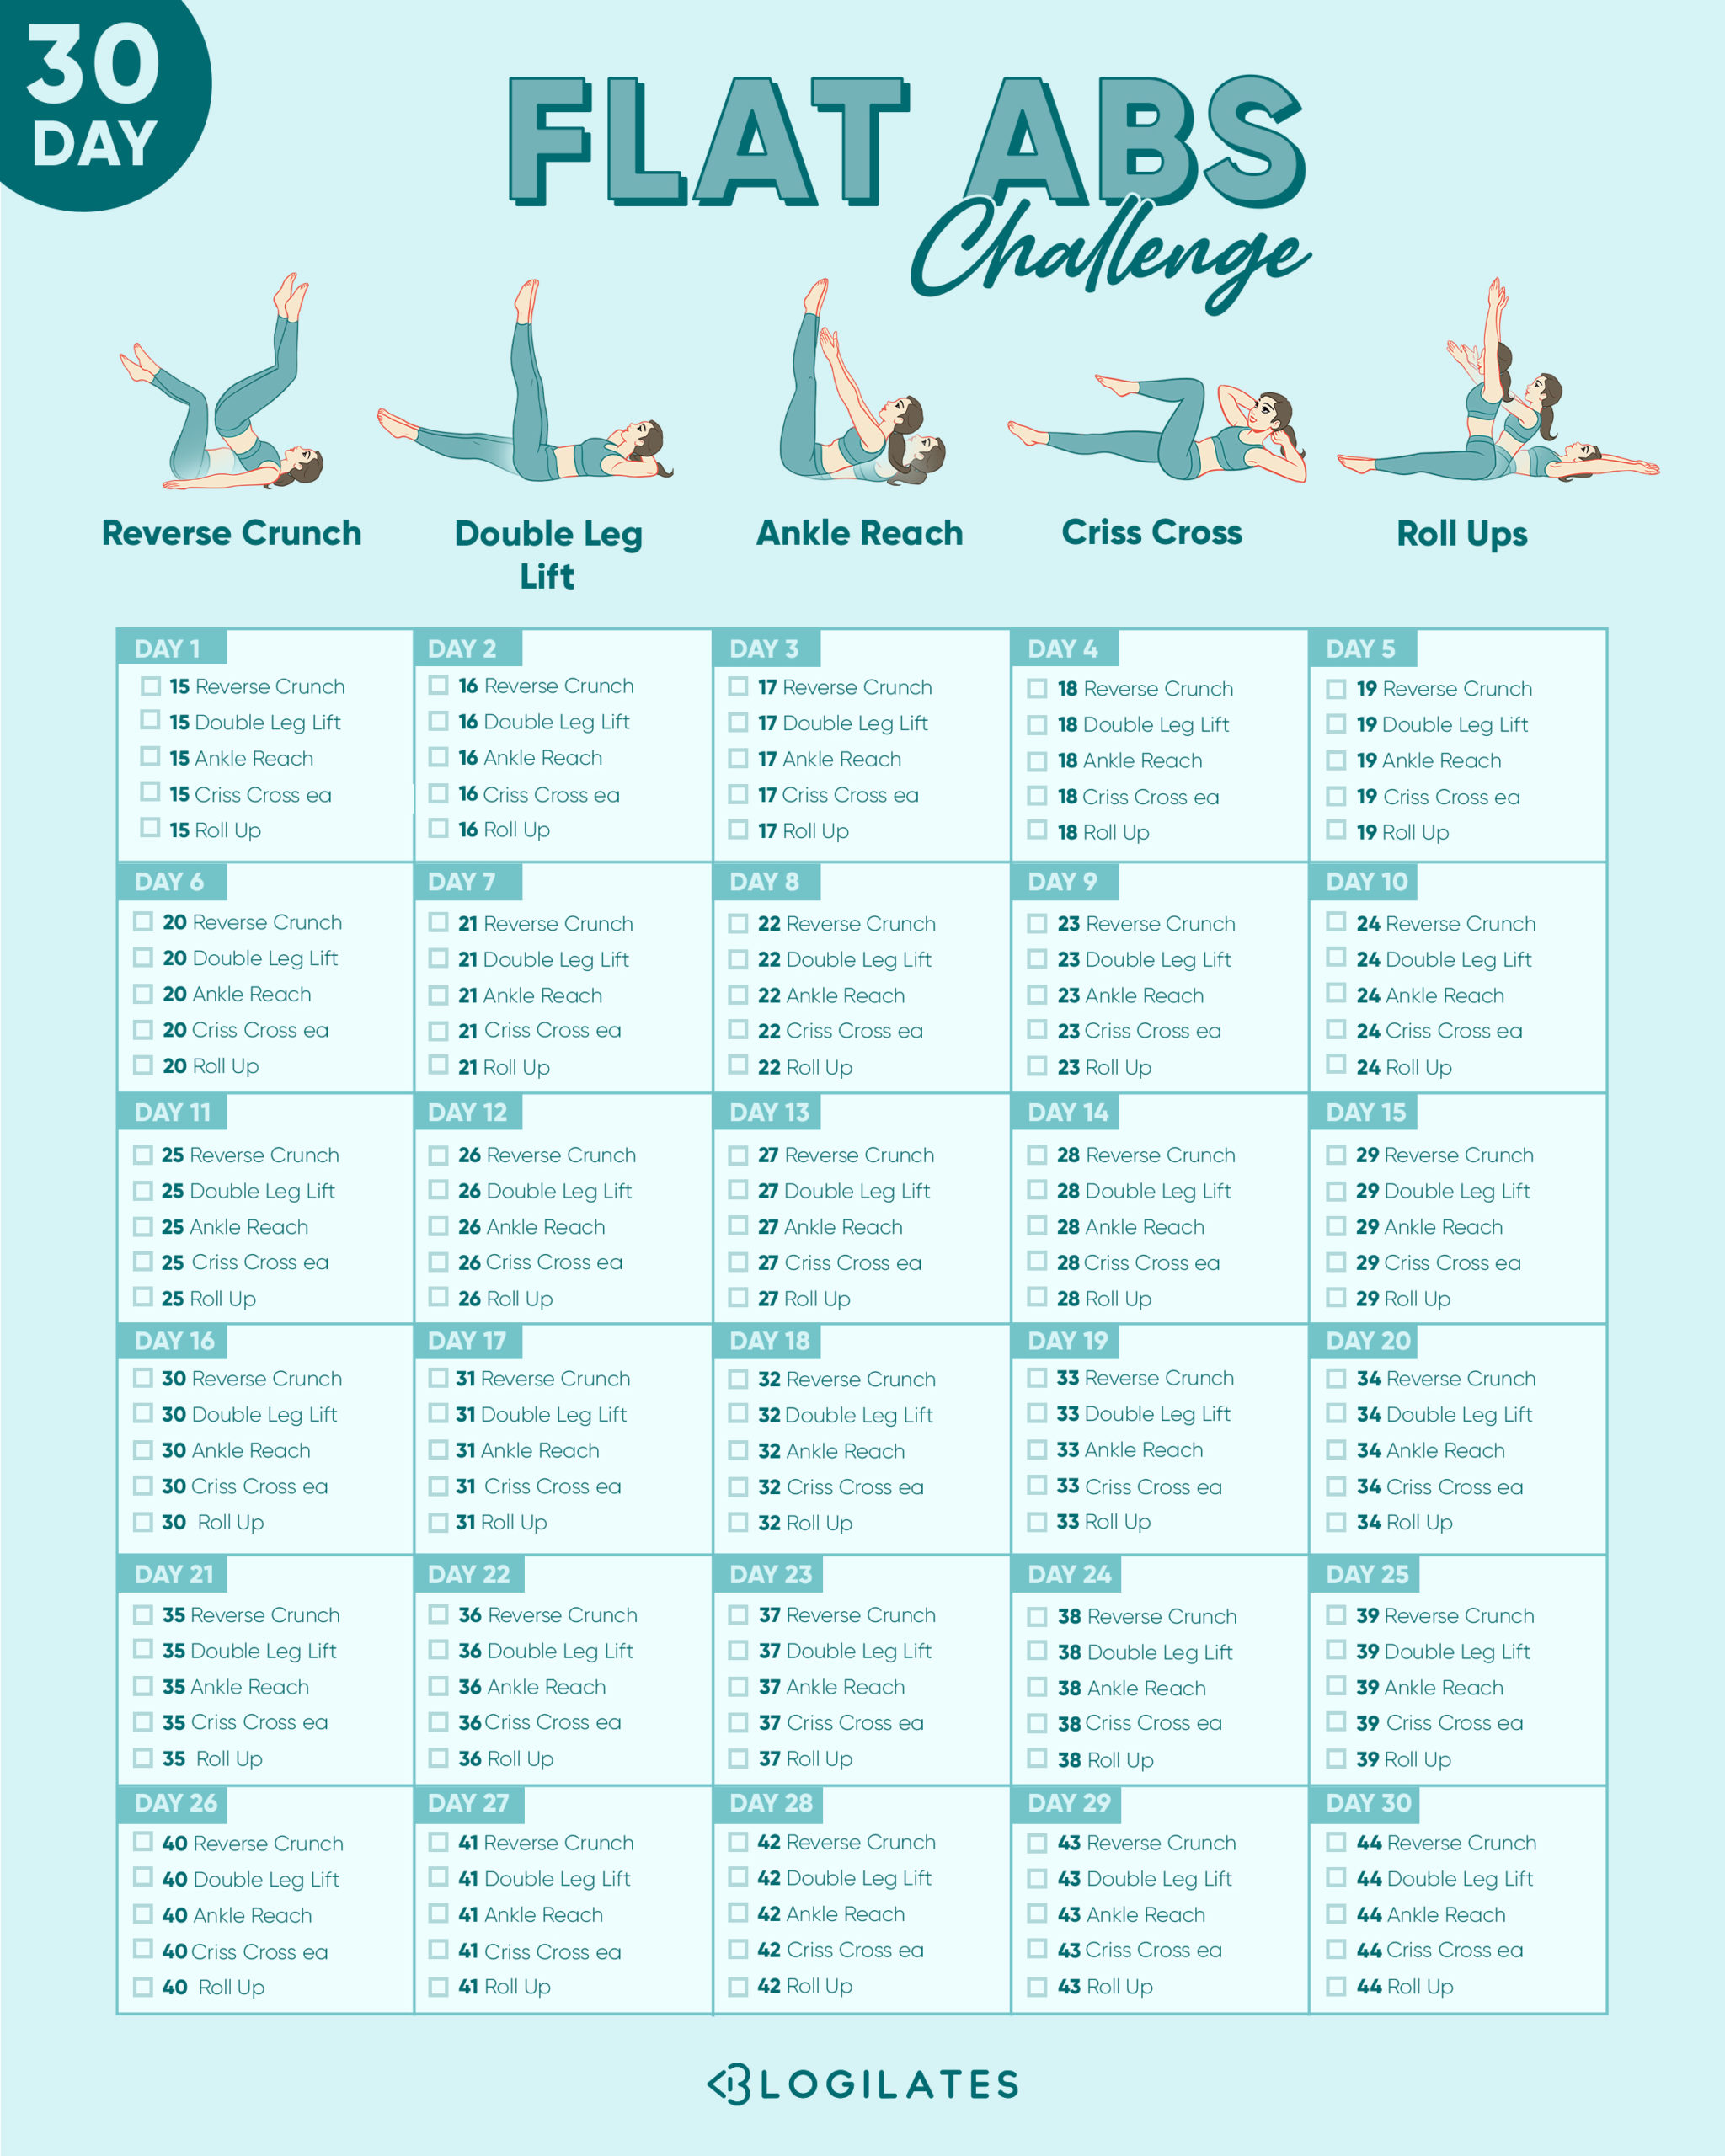 belly slimming challenge)